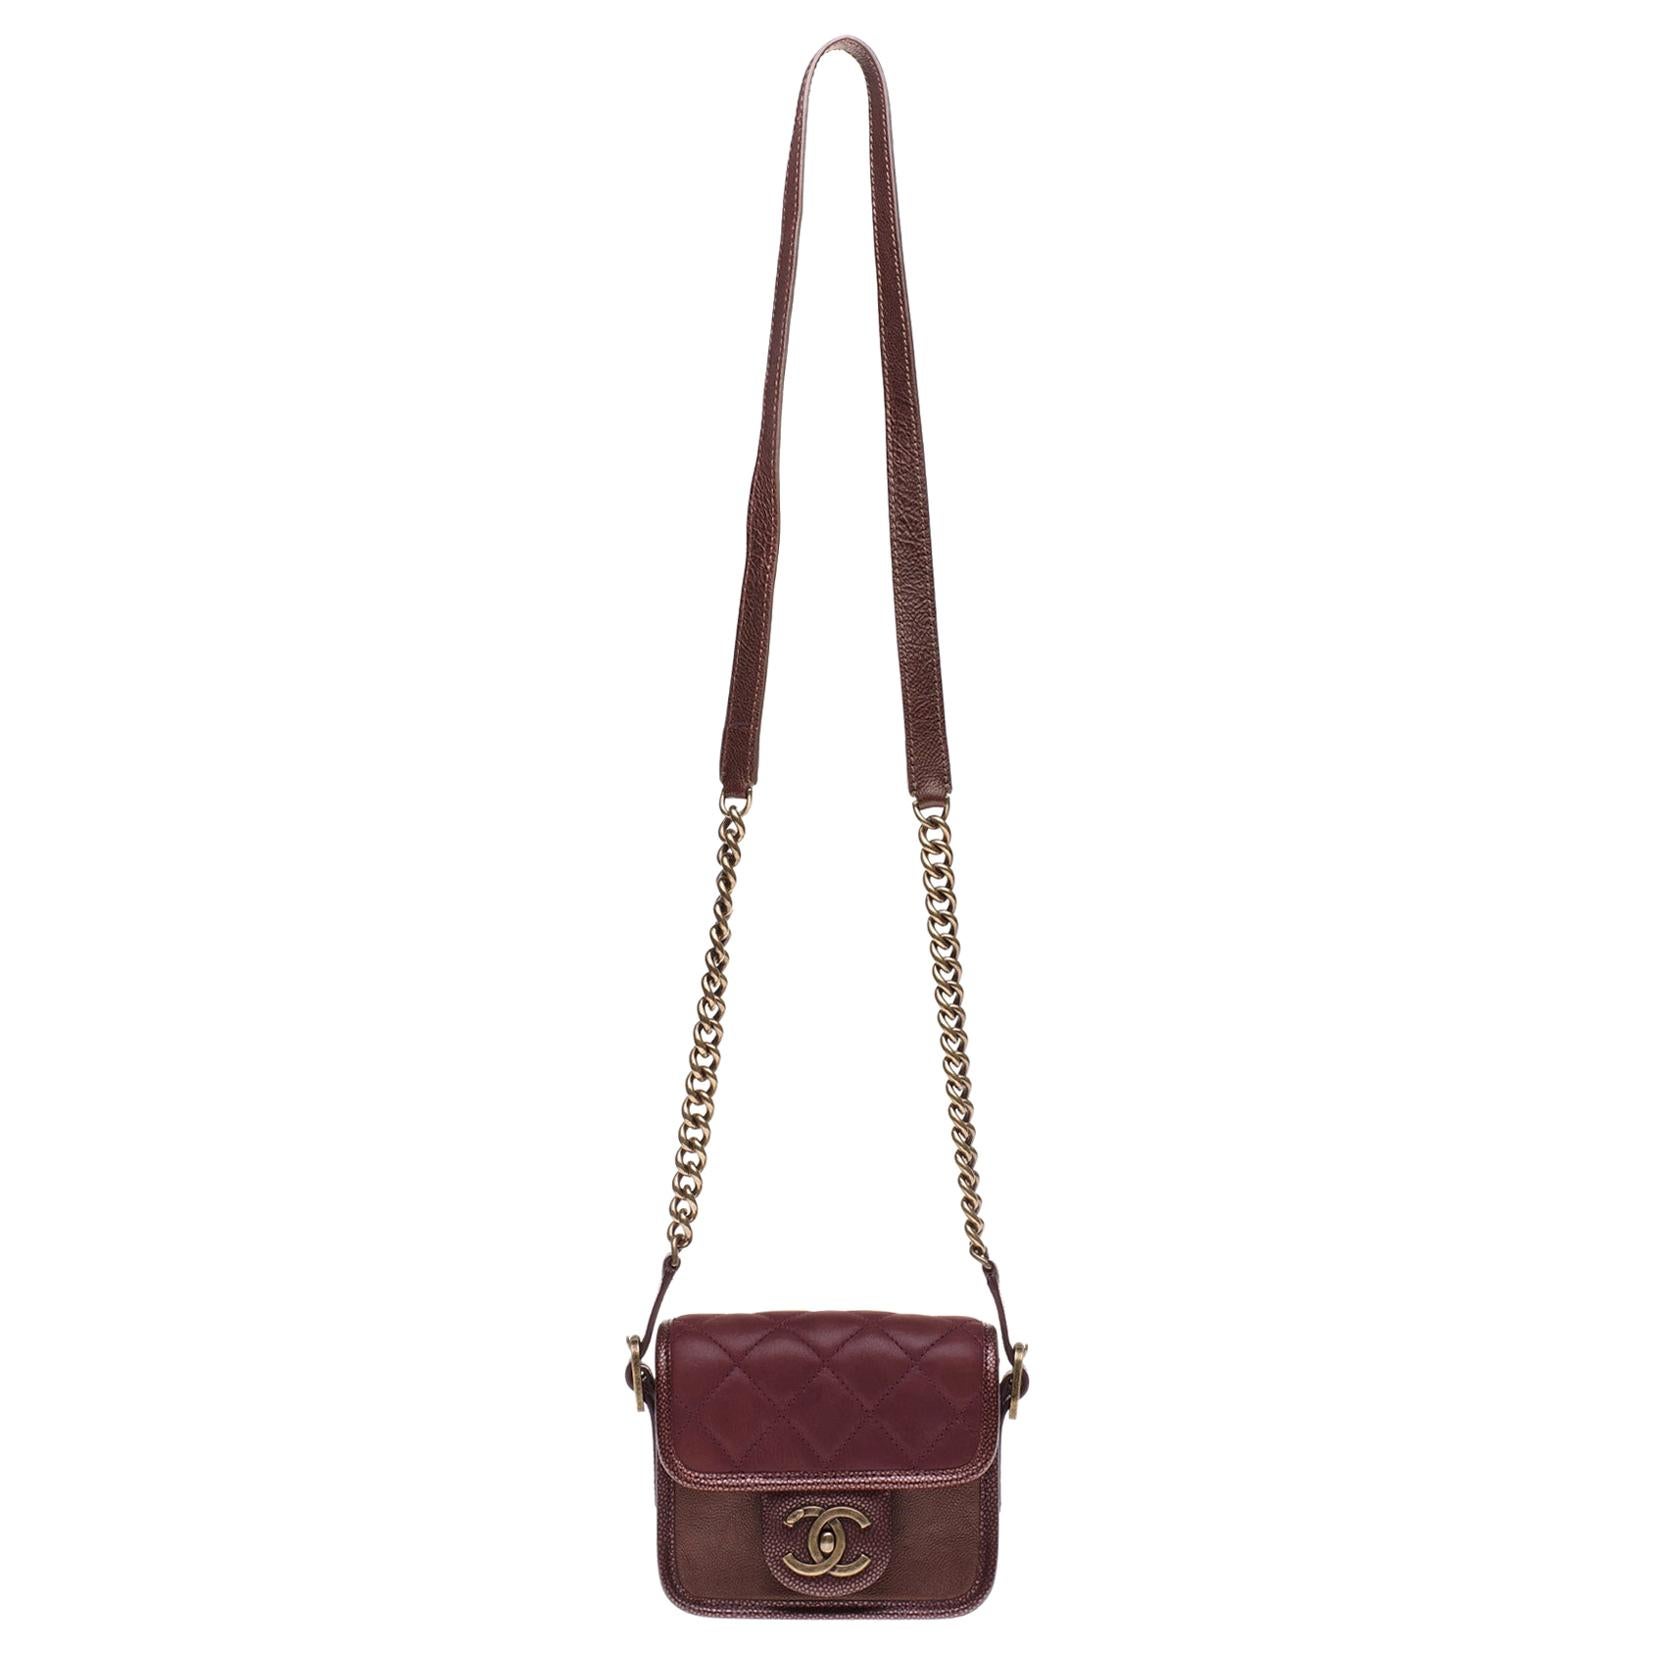 Stunning Mini Chanel Classic shoulder Flap bag in burgundy quilted leather, GHW 4